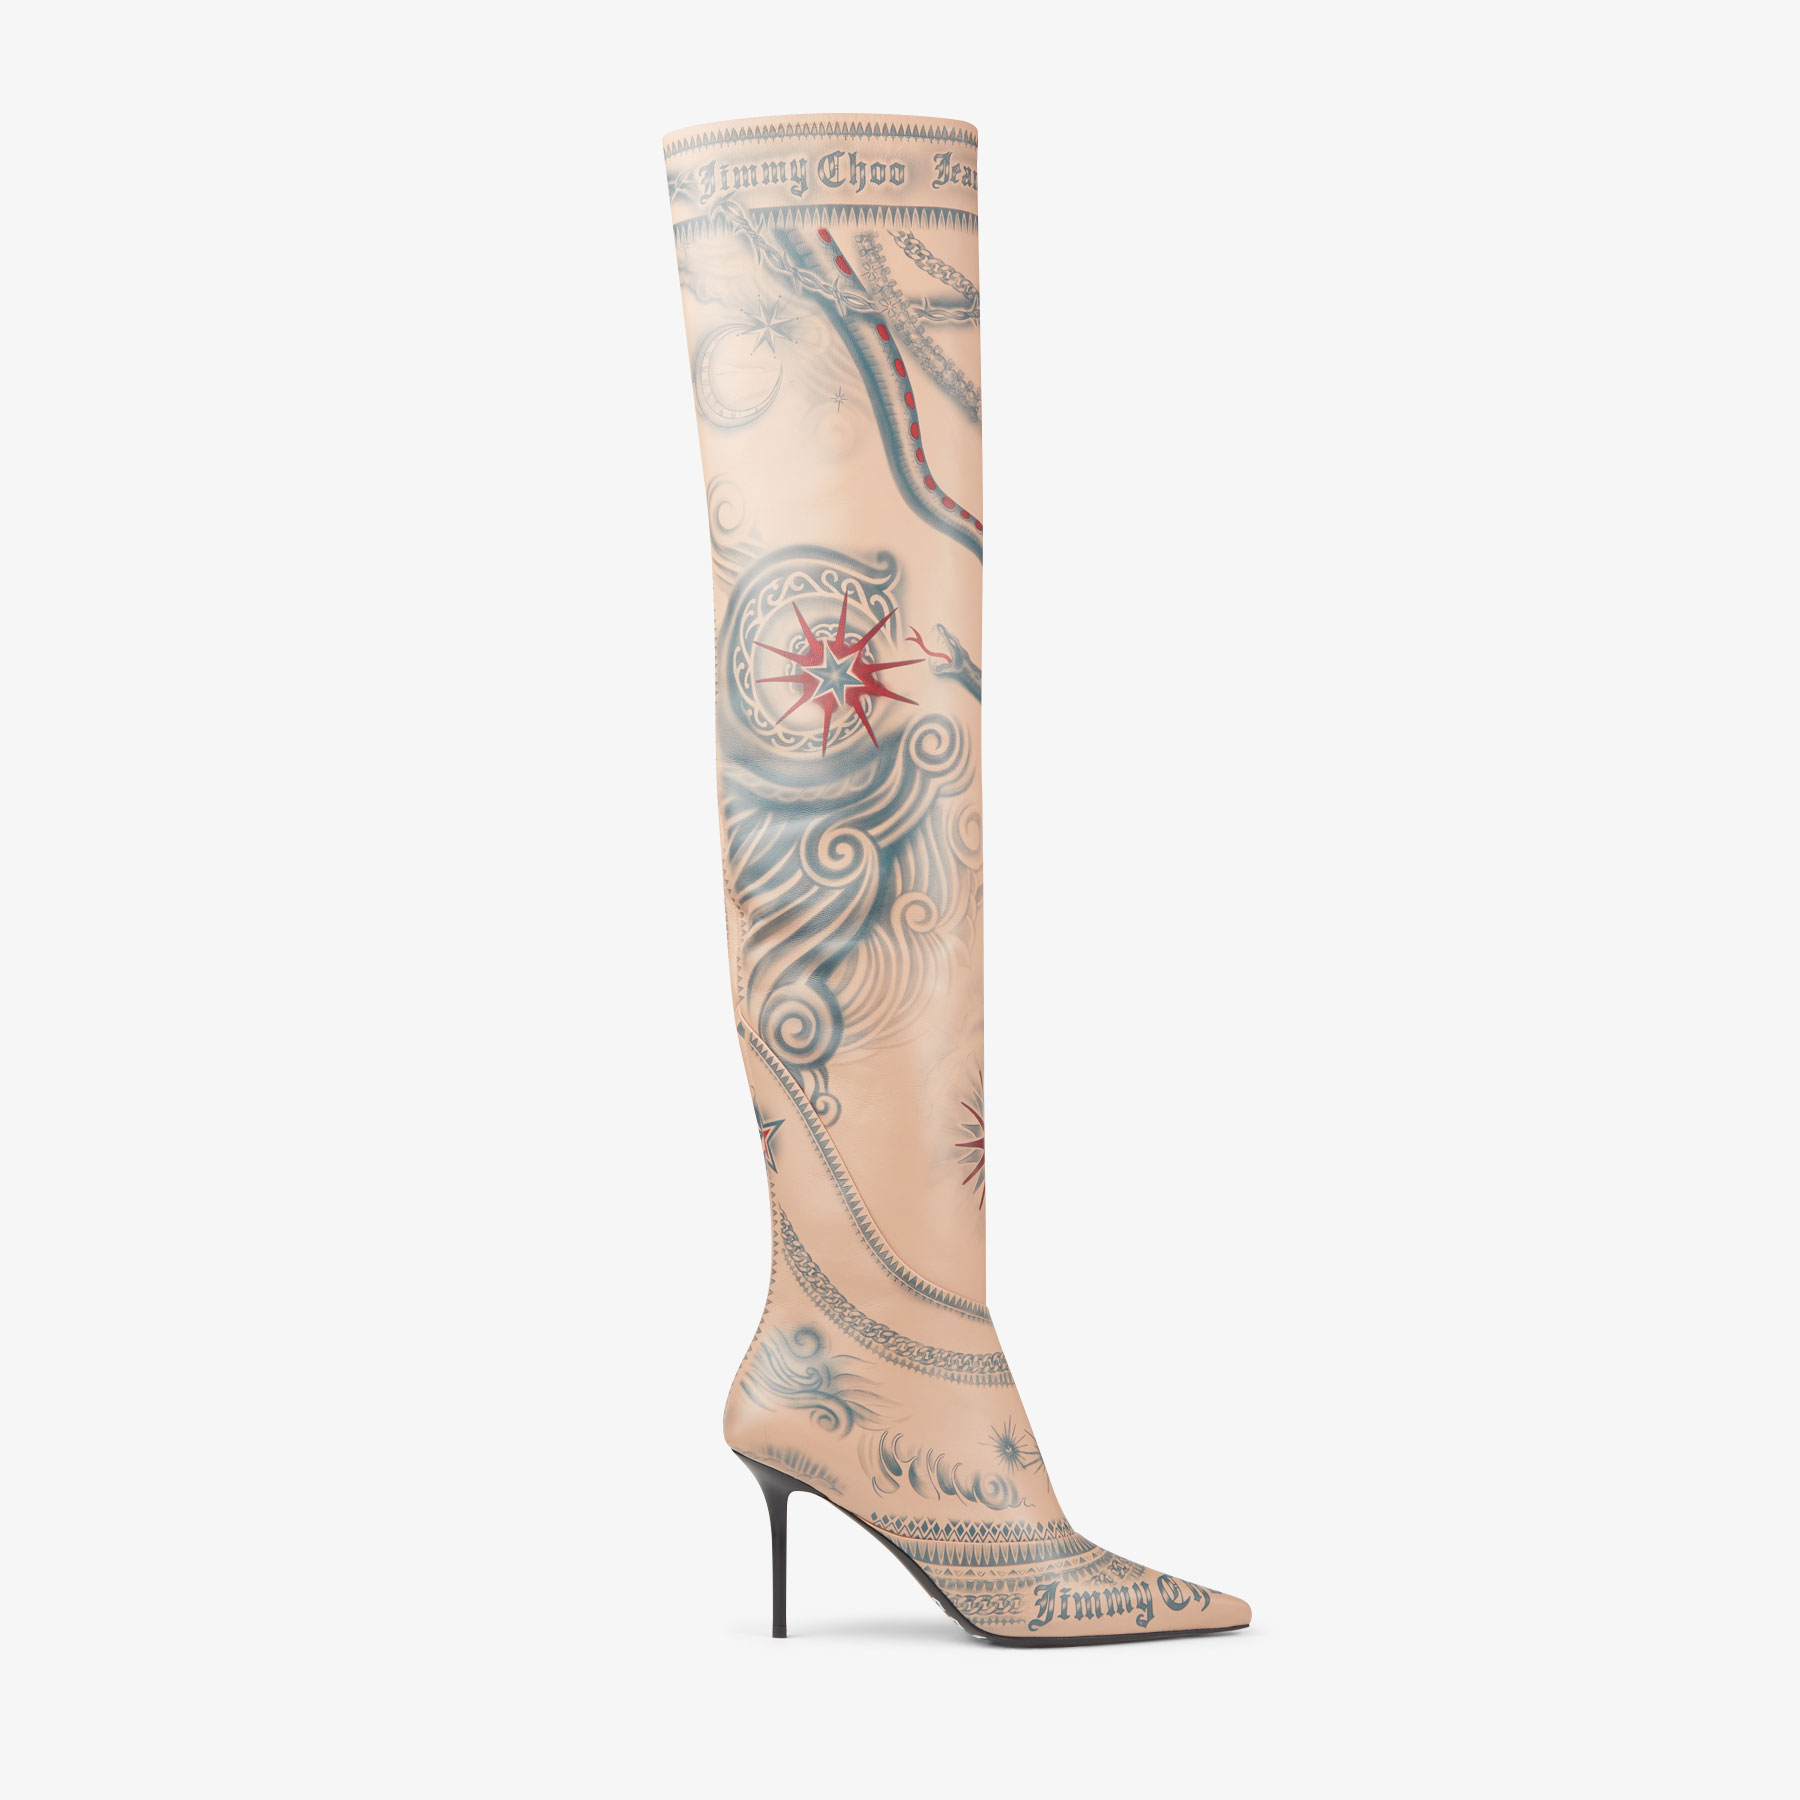 Jean paul gaultier jimmy choo over the knee boots 90